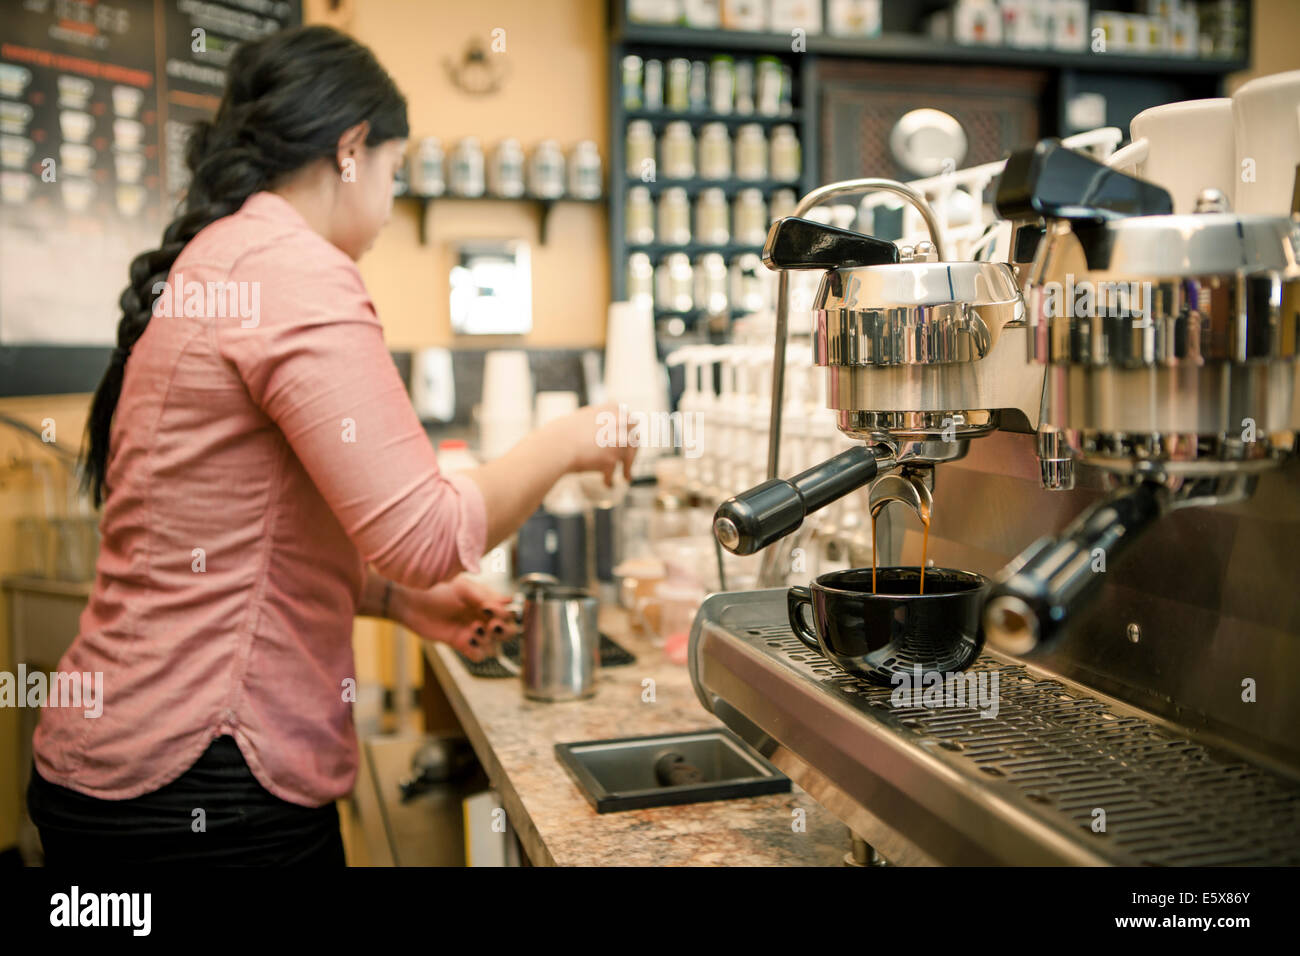 Barista busy with espresso machine in cafe Stock Photo